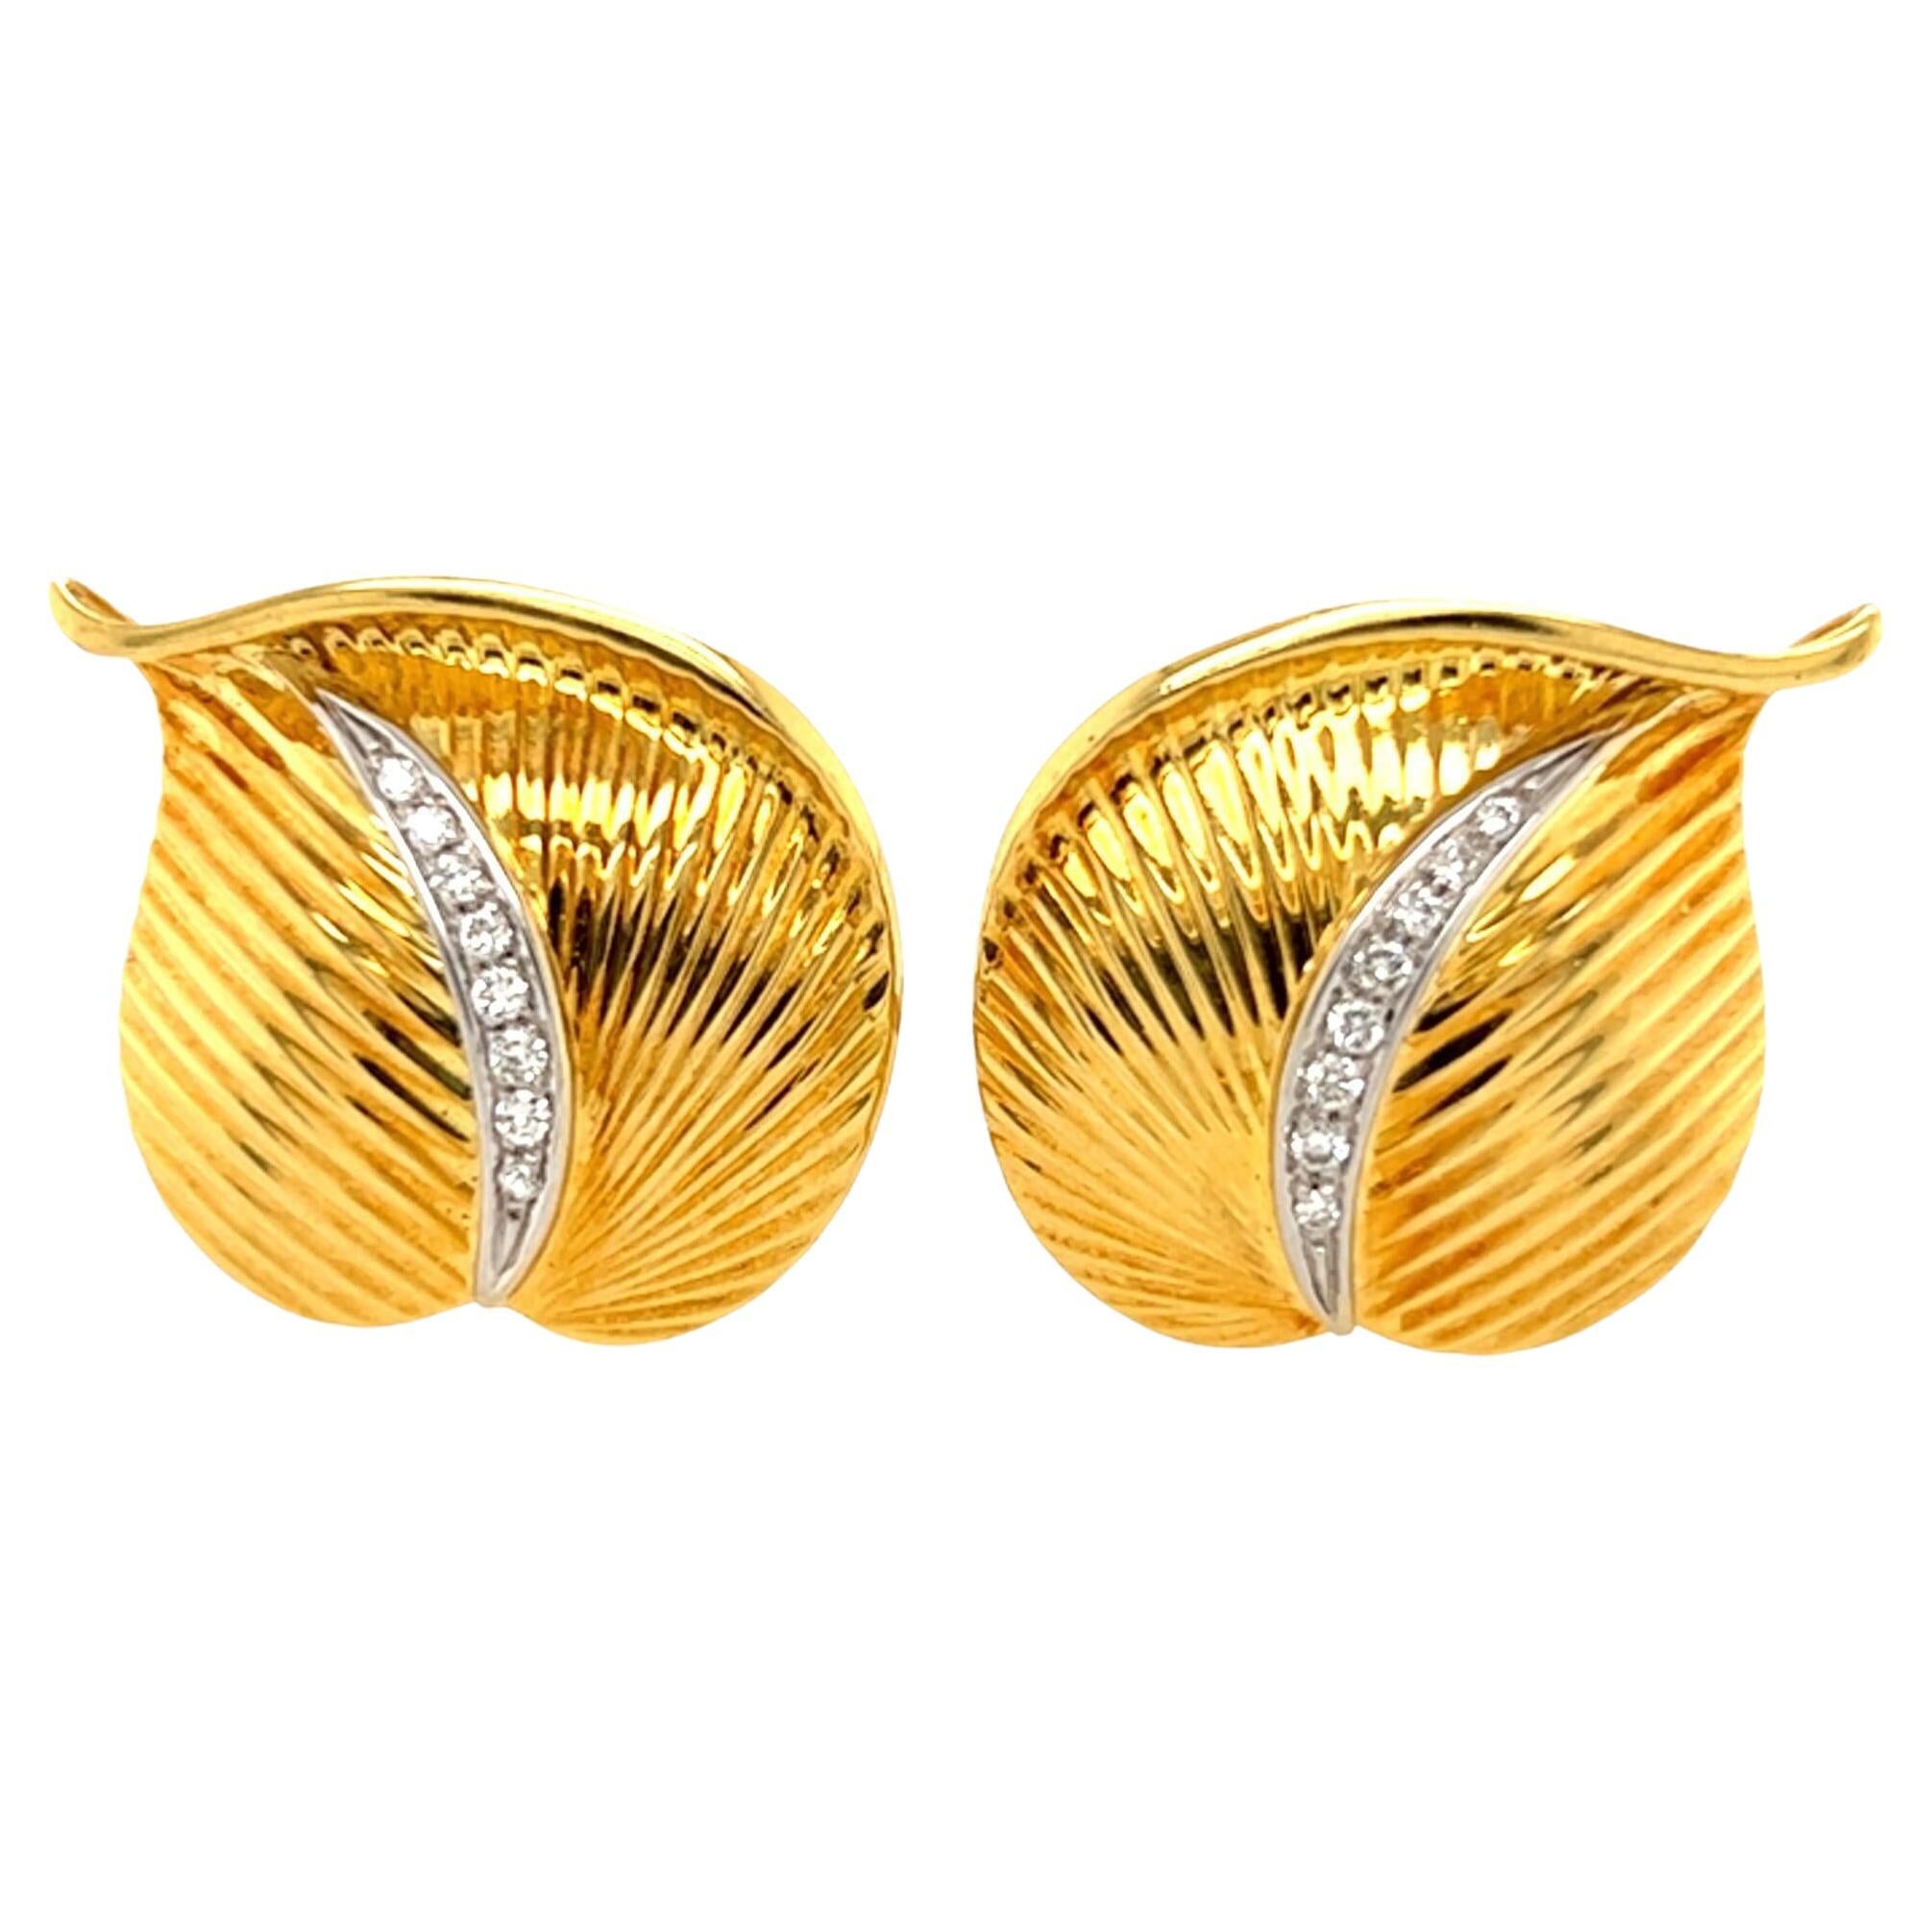 A pair of 18 karat yellow gold and diamond earrings. Italian, Designed as a leaf, enhanced by a pave set diamond stem. Length is approximately 1 1/8 inches, gross weight is approximately 12.1 grams. Stamped 18K Italy, 750, with Italian assay mark. 